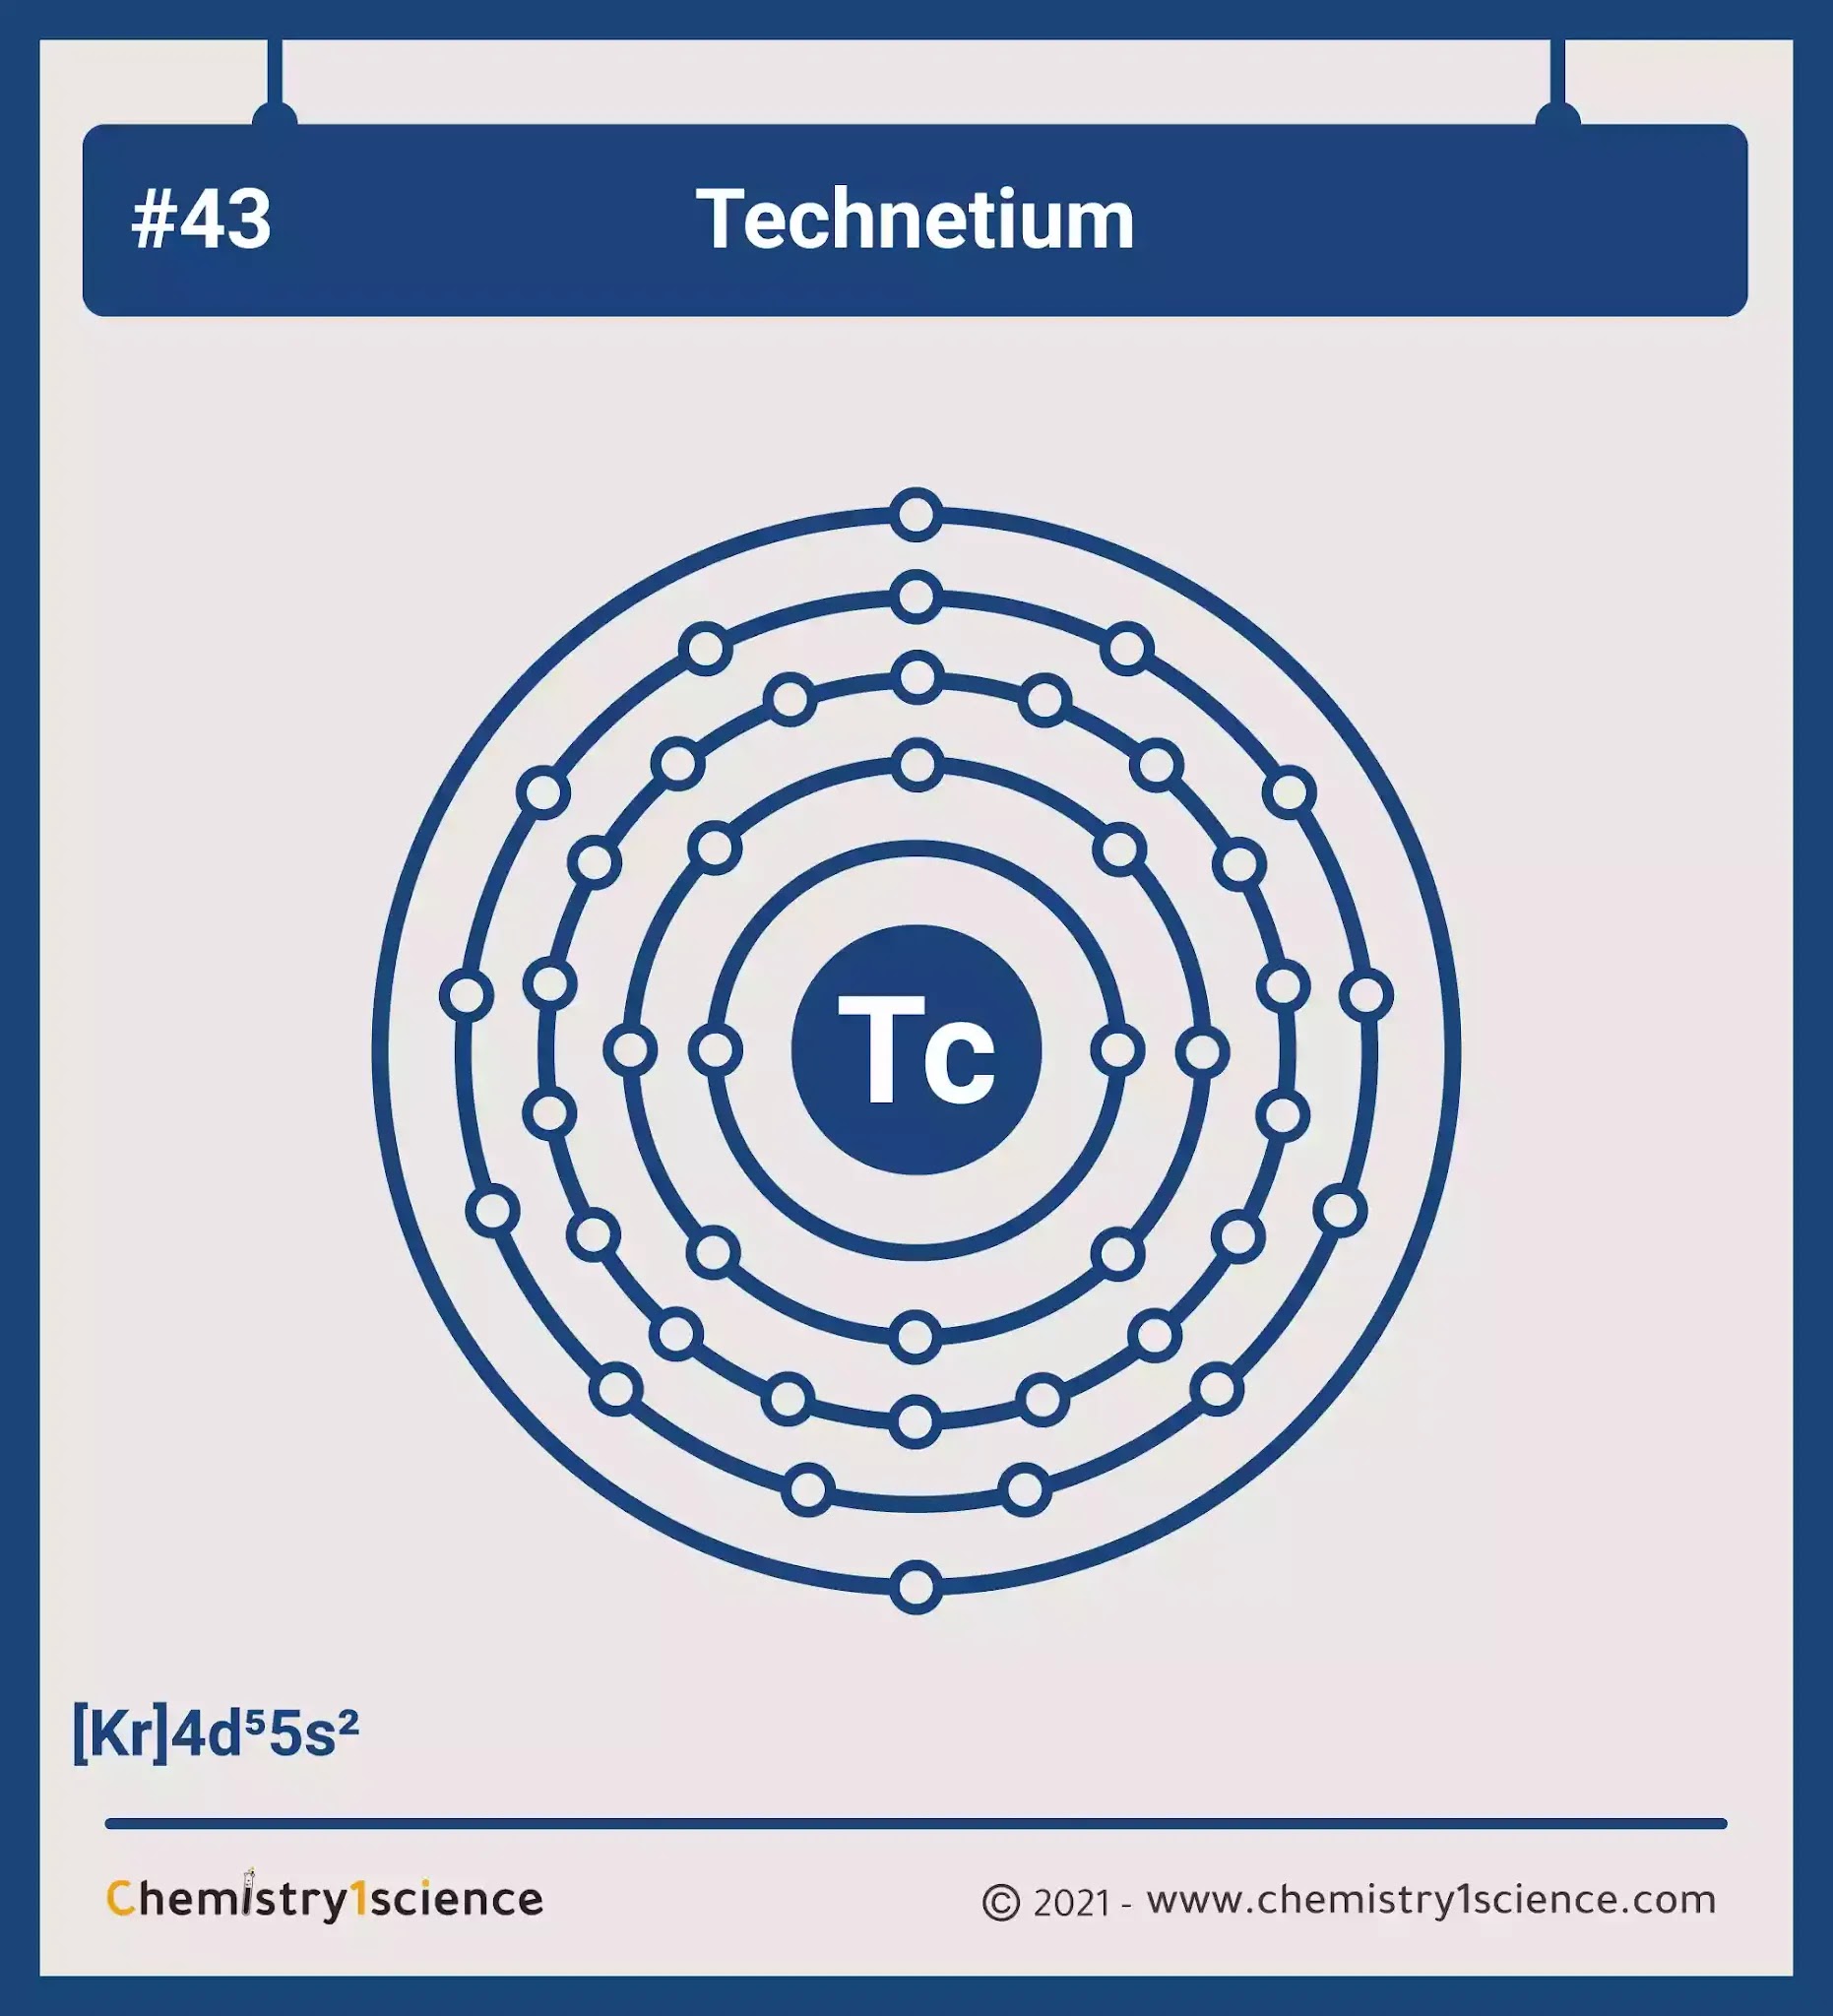 Technetium: Electron configuration - Symbol - Atomic Number - Atomic Mass - Oxidation States - Standard State - Group Block - Year Discovered – infographic